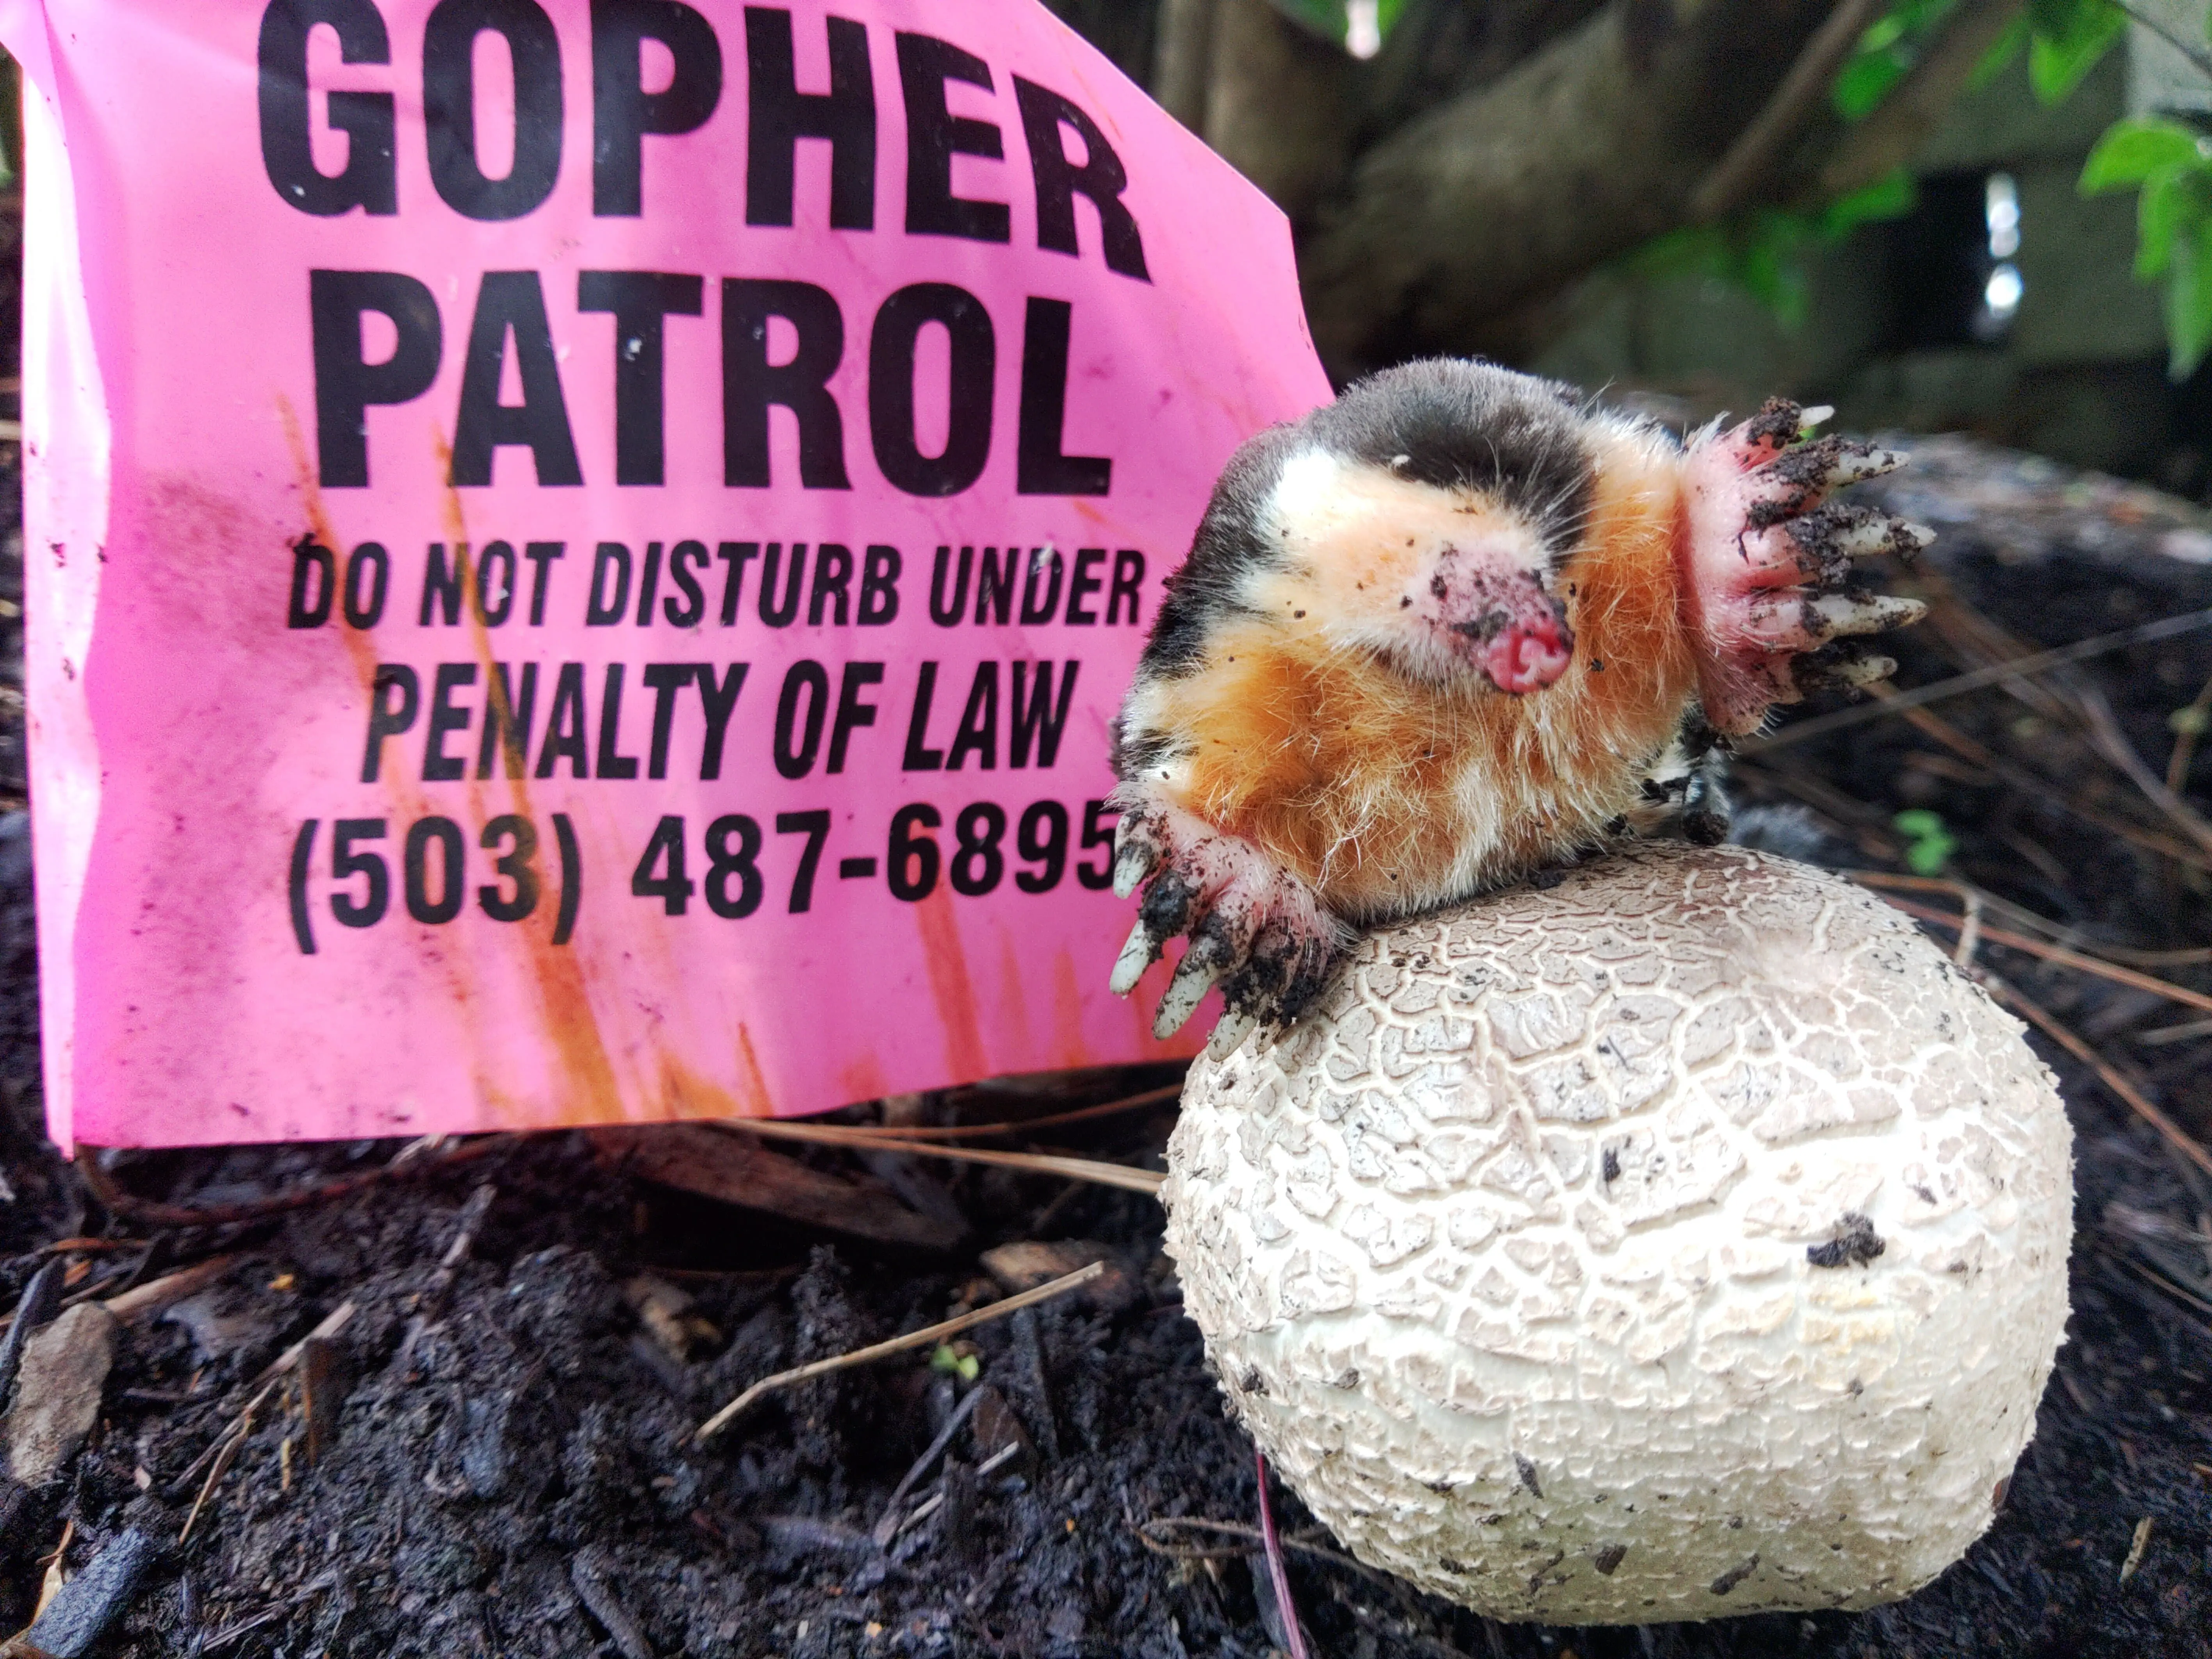 Gopher Patrol removes moles and gophers effectively throughout the Willamette Valley